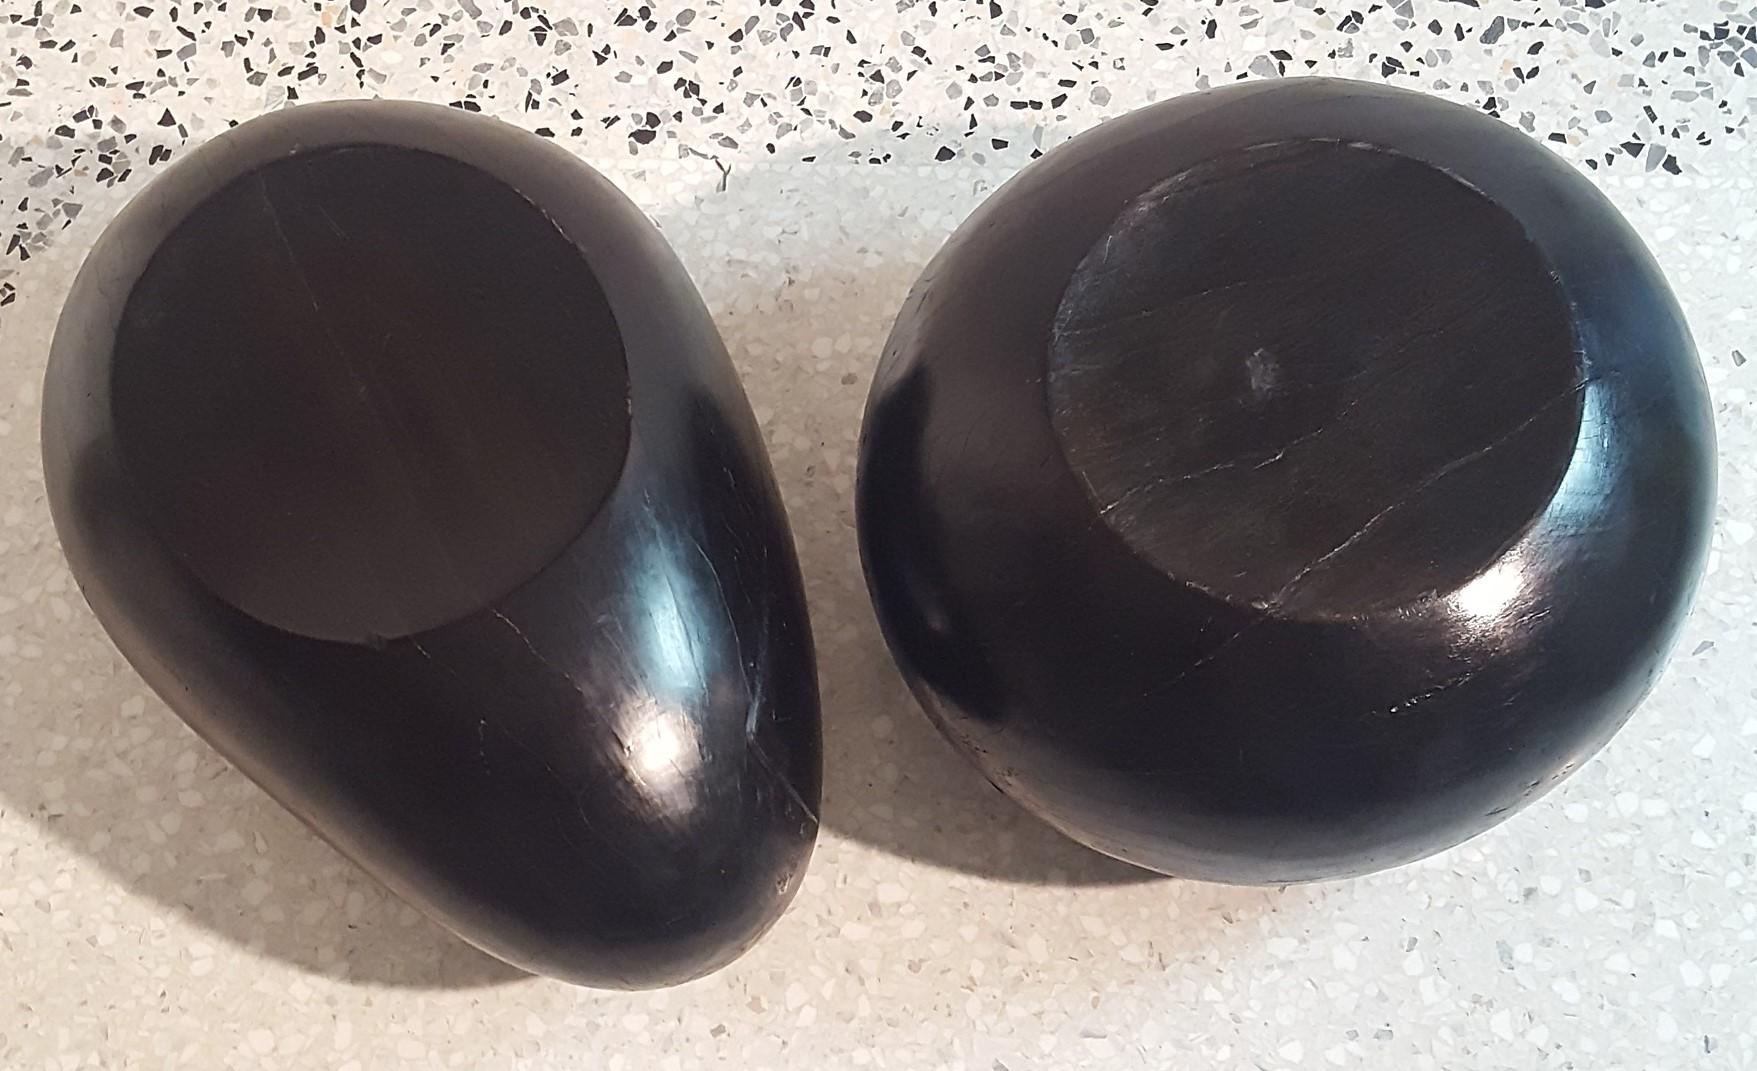 Exceptional and rare set of two sculptural solid black lacquered wood seats made in one massive turned piece of wood.
One with circular shape (diameter 60 cm) and the second with egg shape. (70x 50 cm) height 40
The archetypal form gives them a